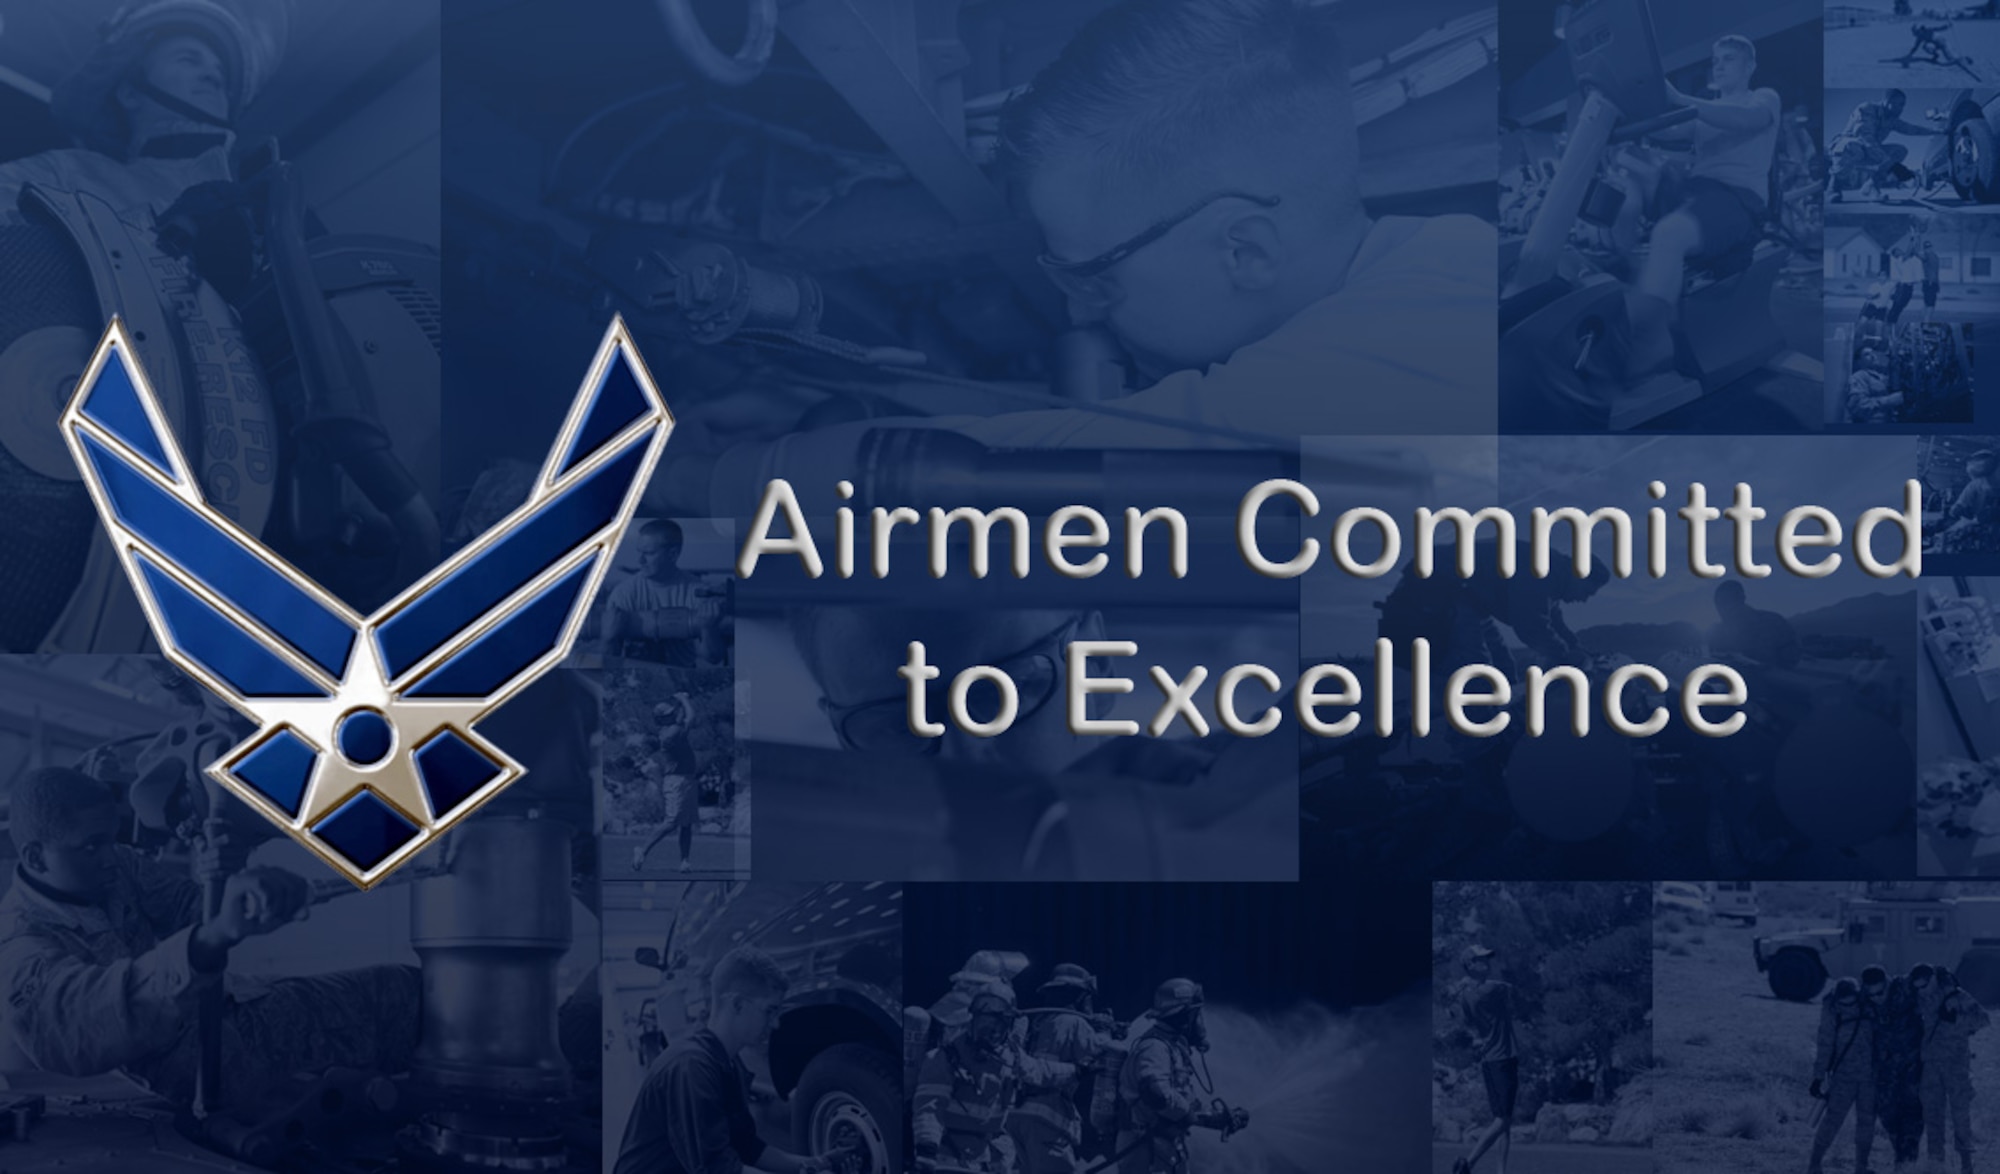 Airman Committed to Excellence is an organization dedicated to ensuring the lowest ranking Airmen on base have an opportunity to be heard, while helping them develop their leadership skills and giving them a chance to interact with people of similar rank. The ACE council offers monthly forums for Airmen to voice problems, suggestions and quality of life issues. The ACE council offers many opportunities and events for Airmen to get involved with the base and their fellow Airmen. (U.S. Air Force graphic by Airman 1st Class Rachel Loftis)